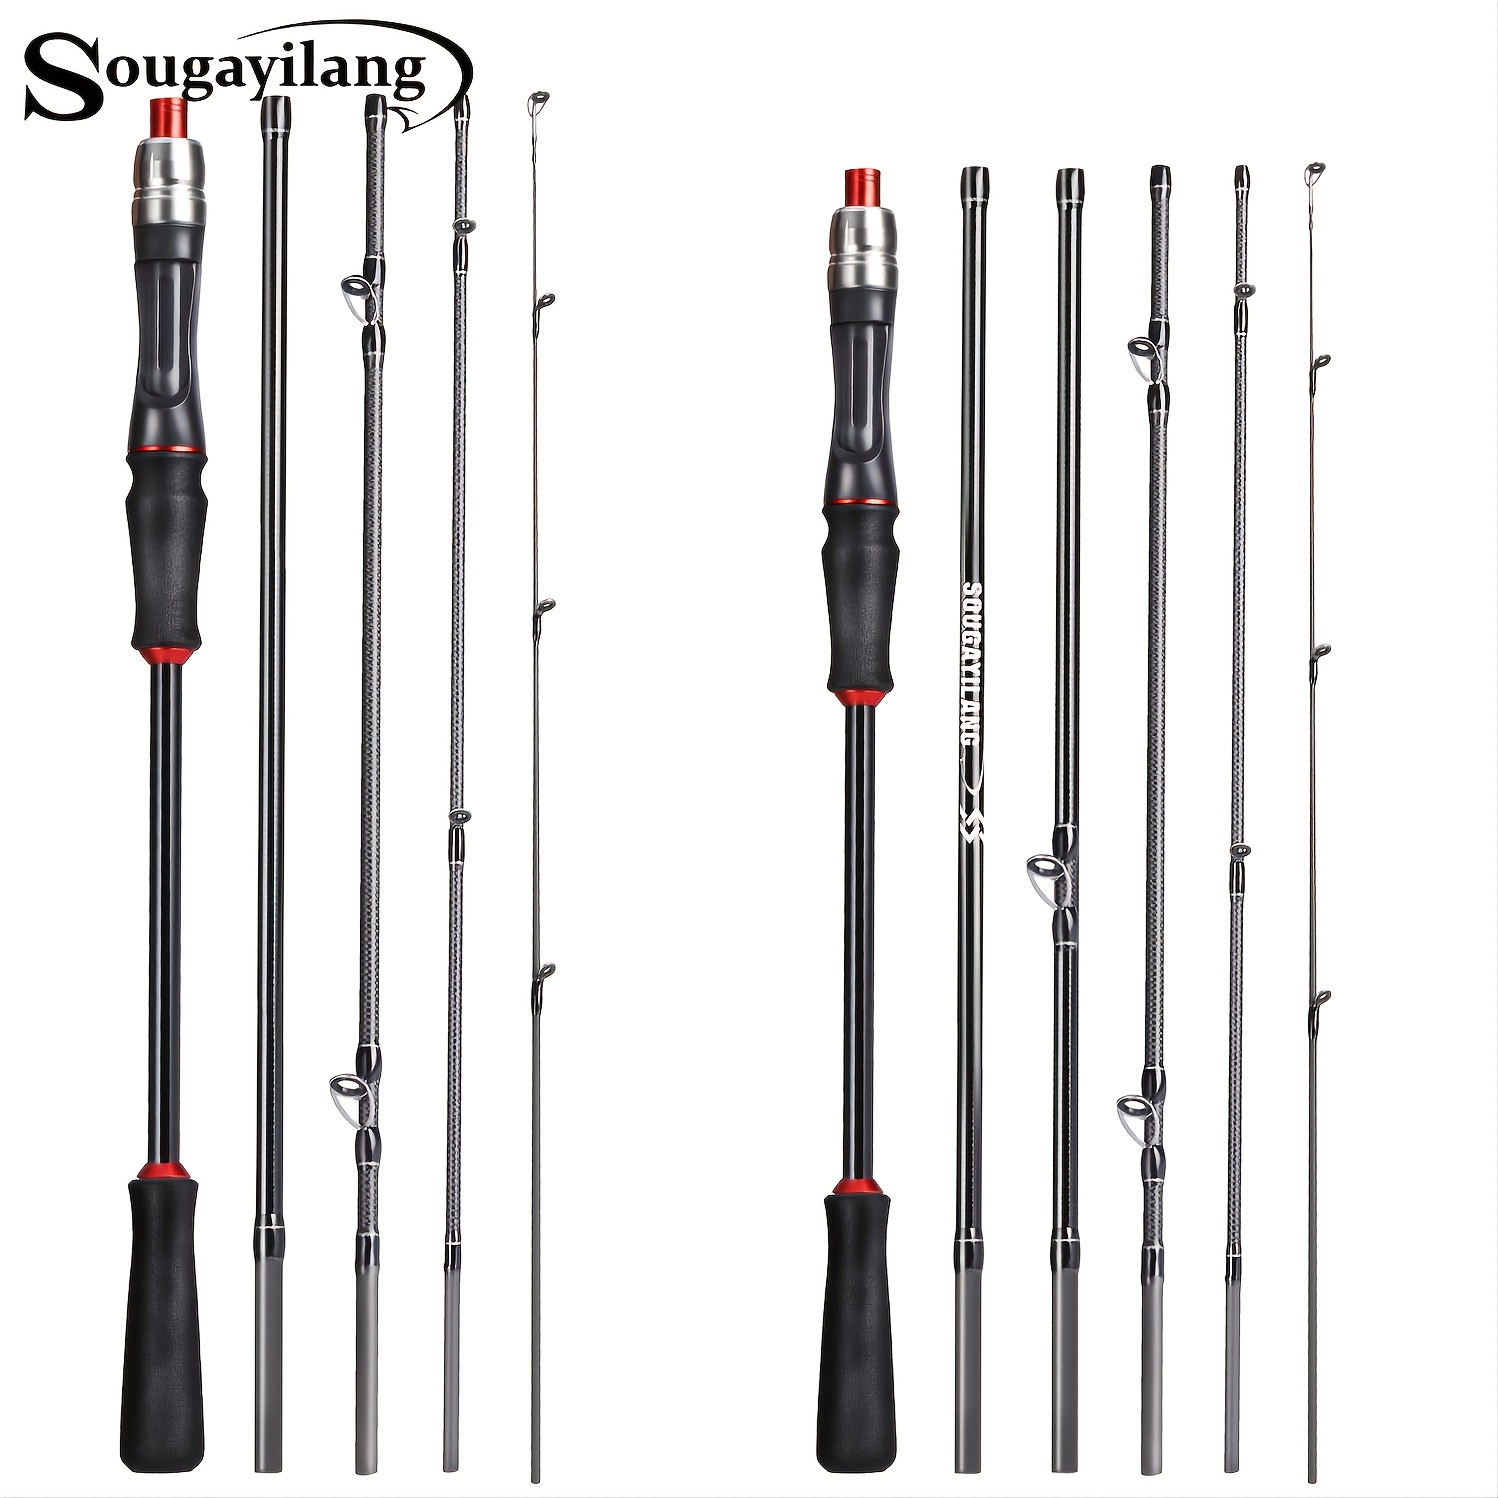 Sougayilang 5/6 Section Spinning Fishing Rod Ideal Saltwater